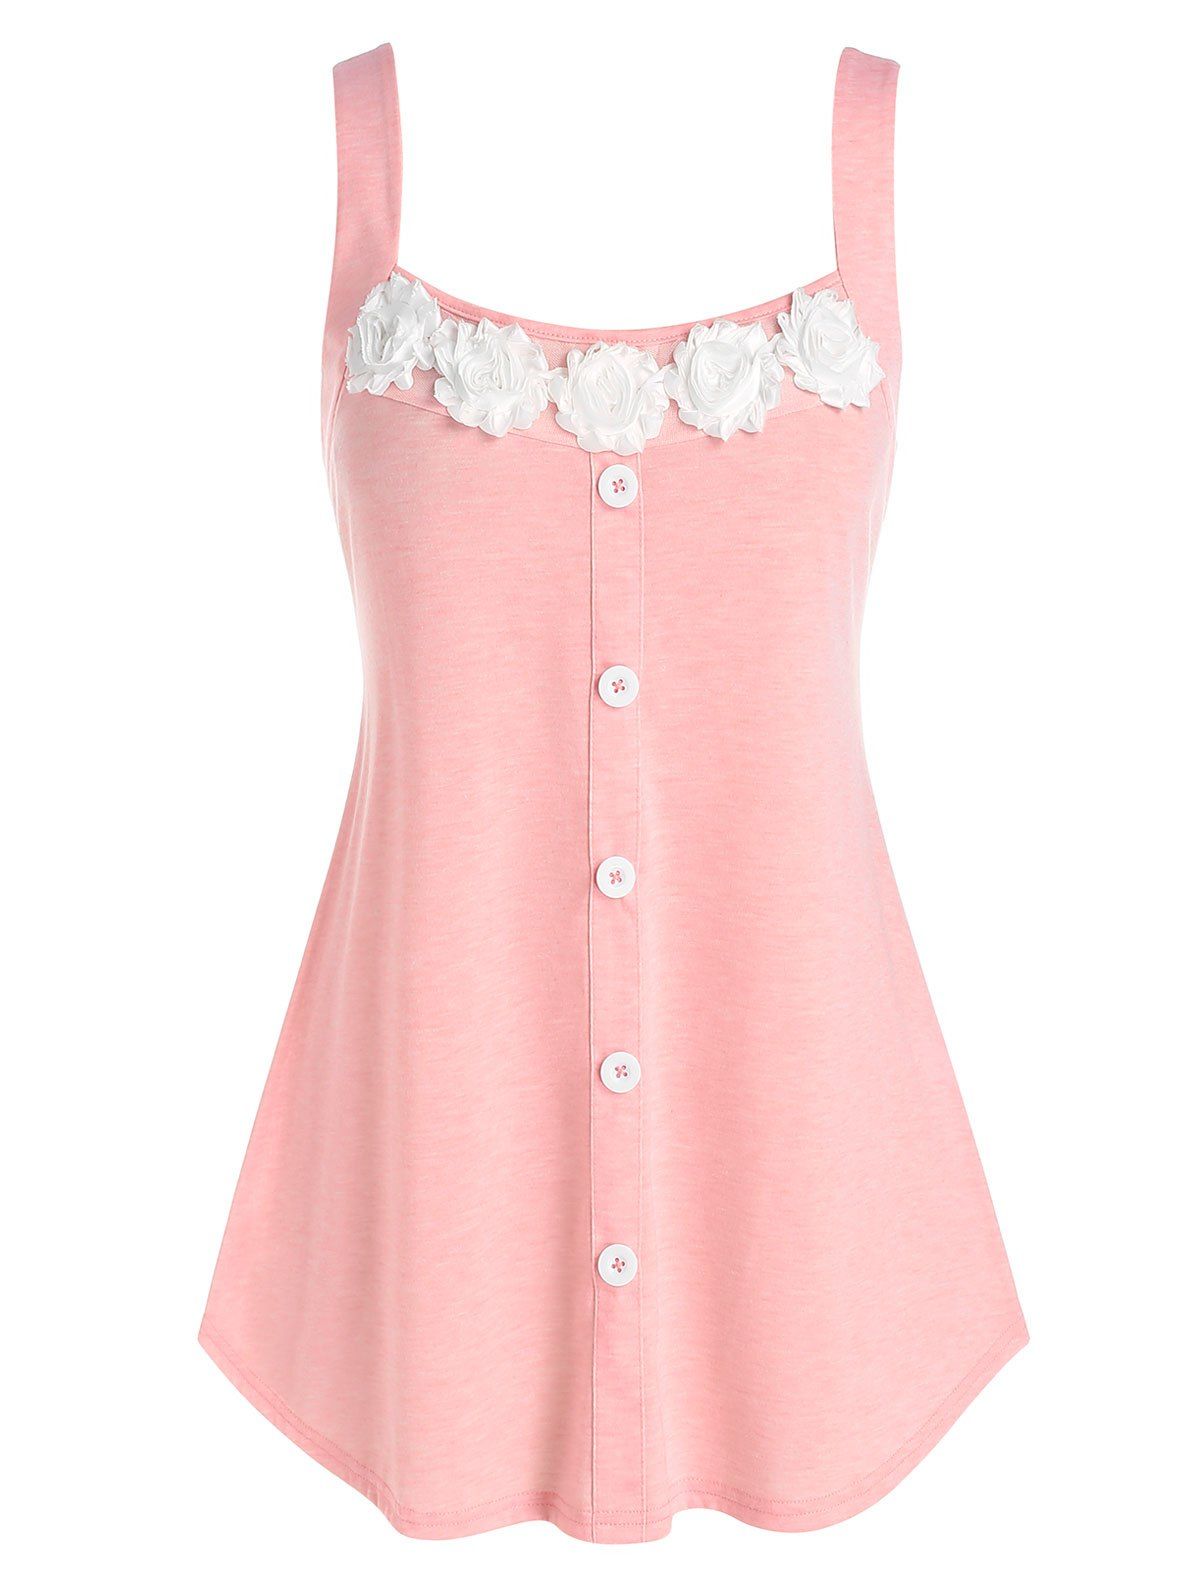 Plus Size Flower Embellished Buttoned Tunic Tank Top - LIGHT PINK 5X